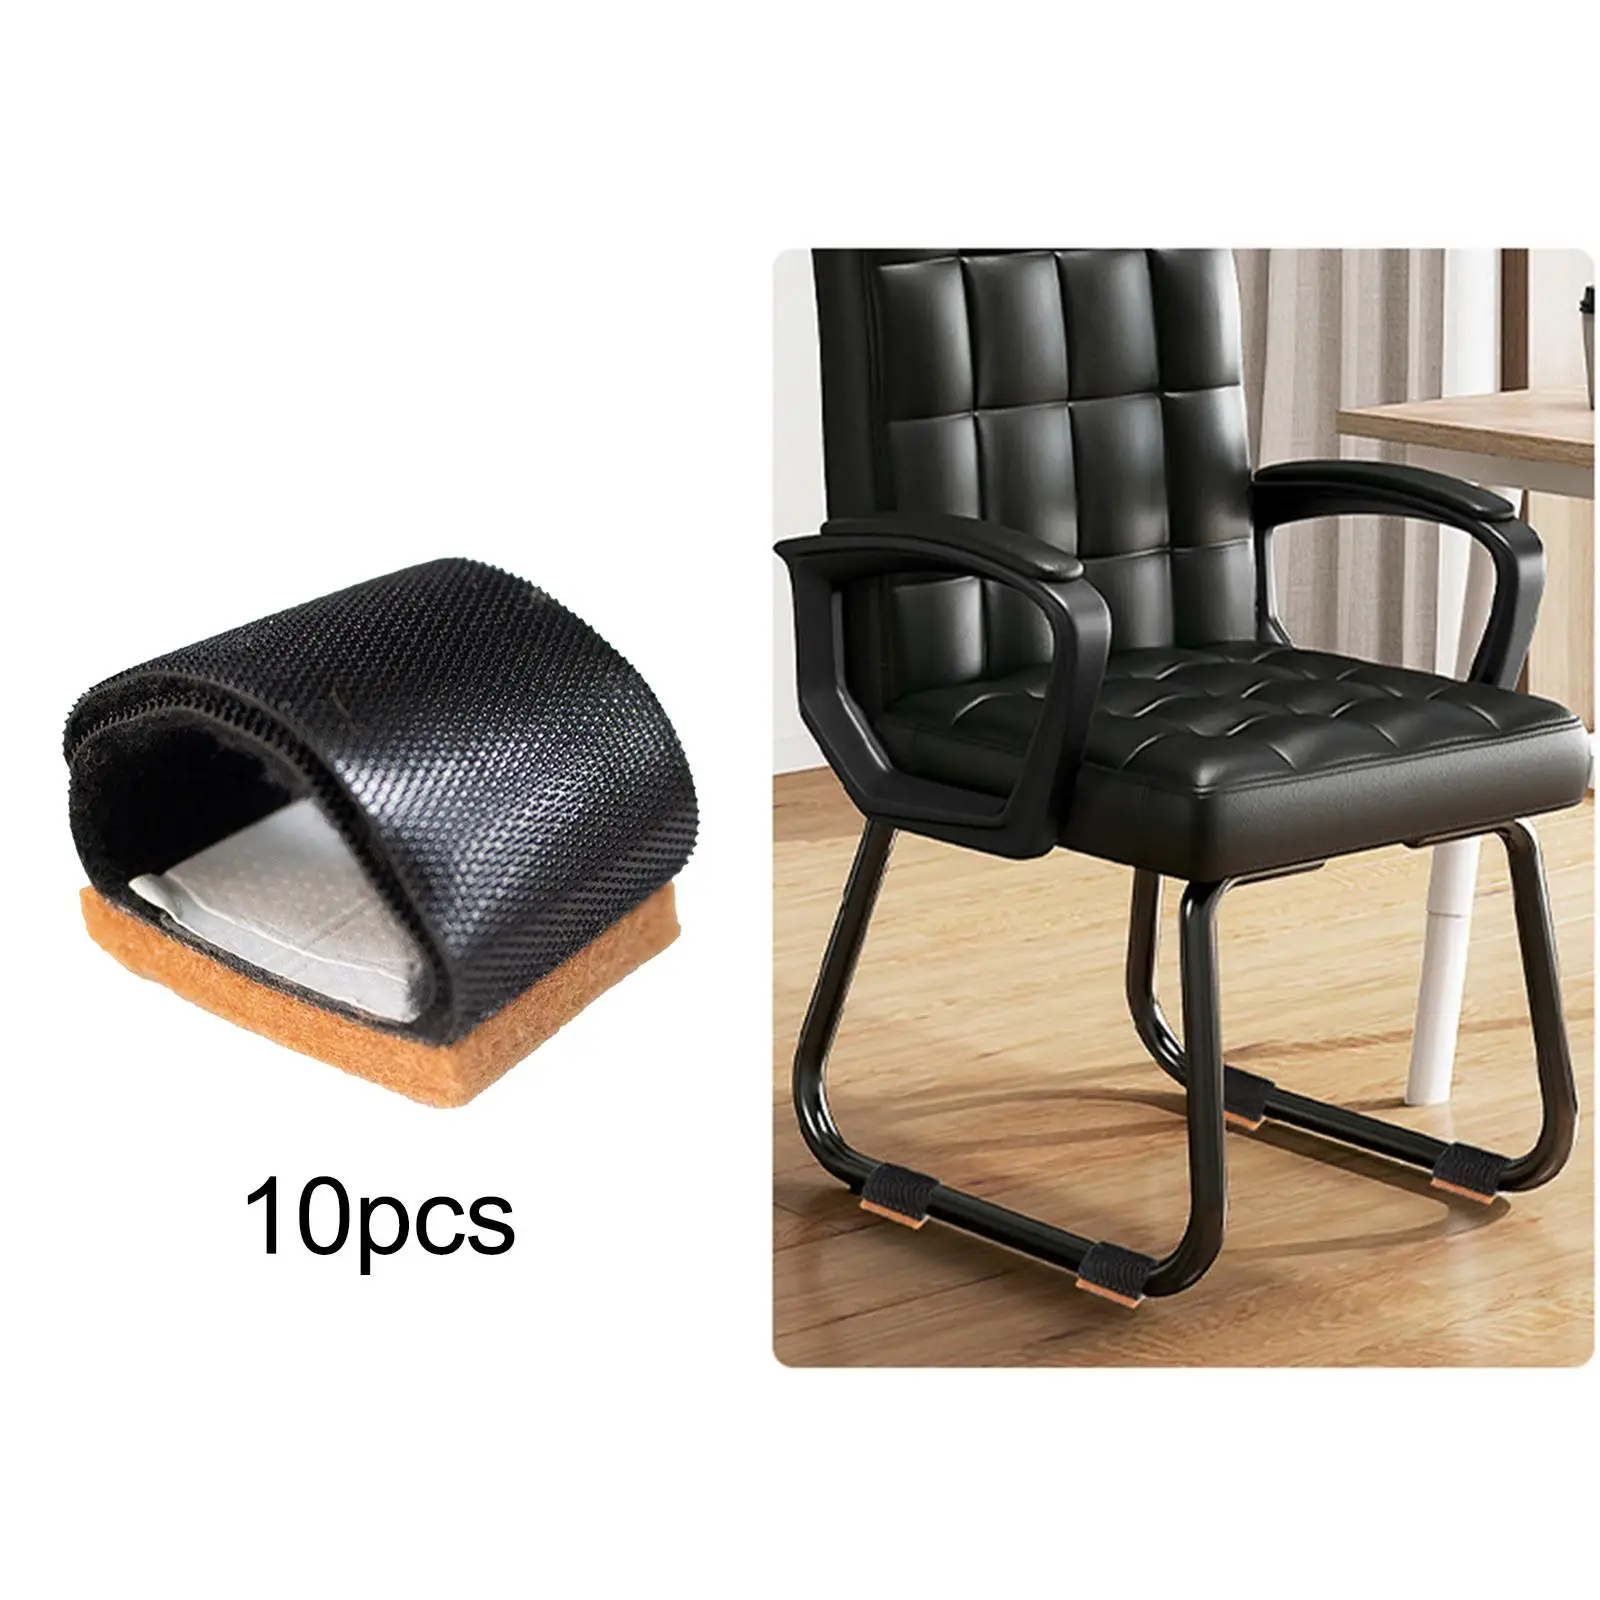 10 Pieces Chair Leg Cover Reduce Noise Adjustable Furniture Feet Cover Rocking Chair Foot Pad for Patio Desk Office Fittings